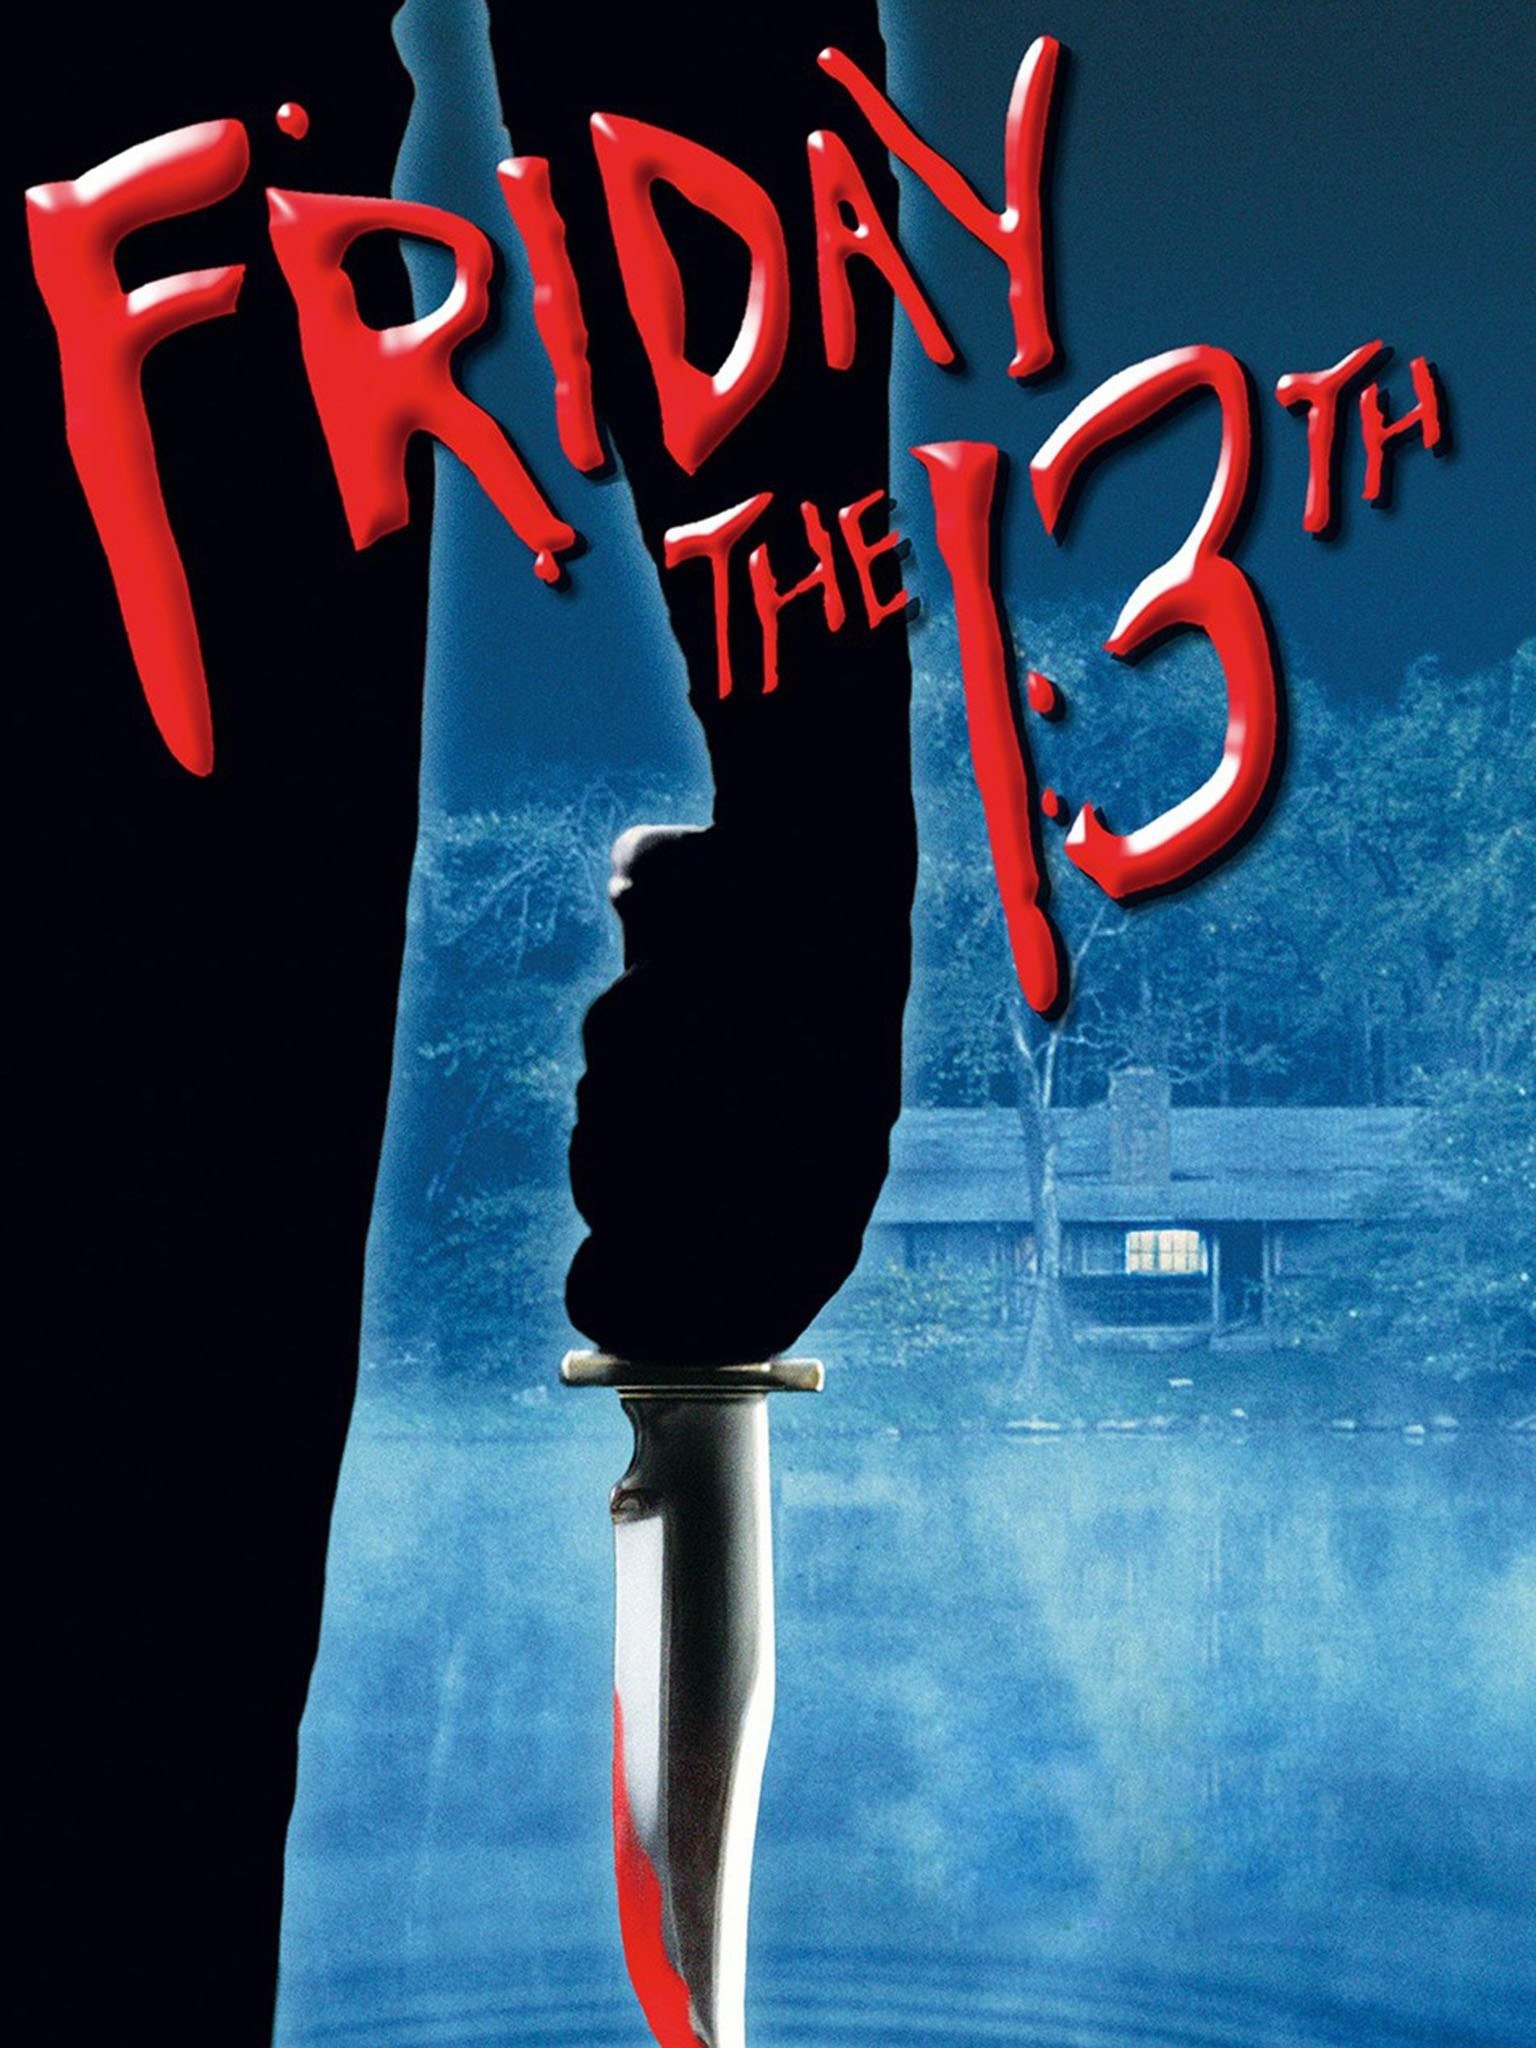 Friday the 13th (Video Game 1989) - IMDb